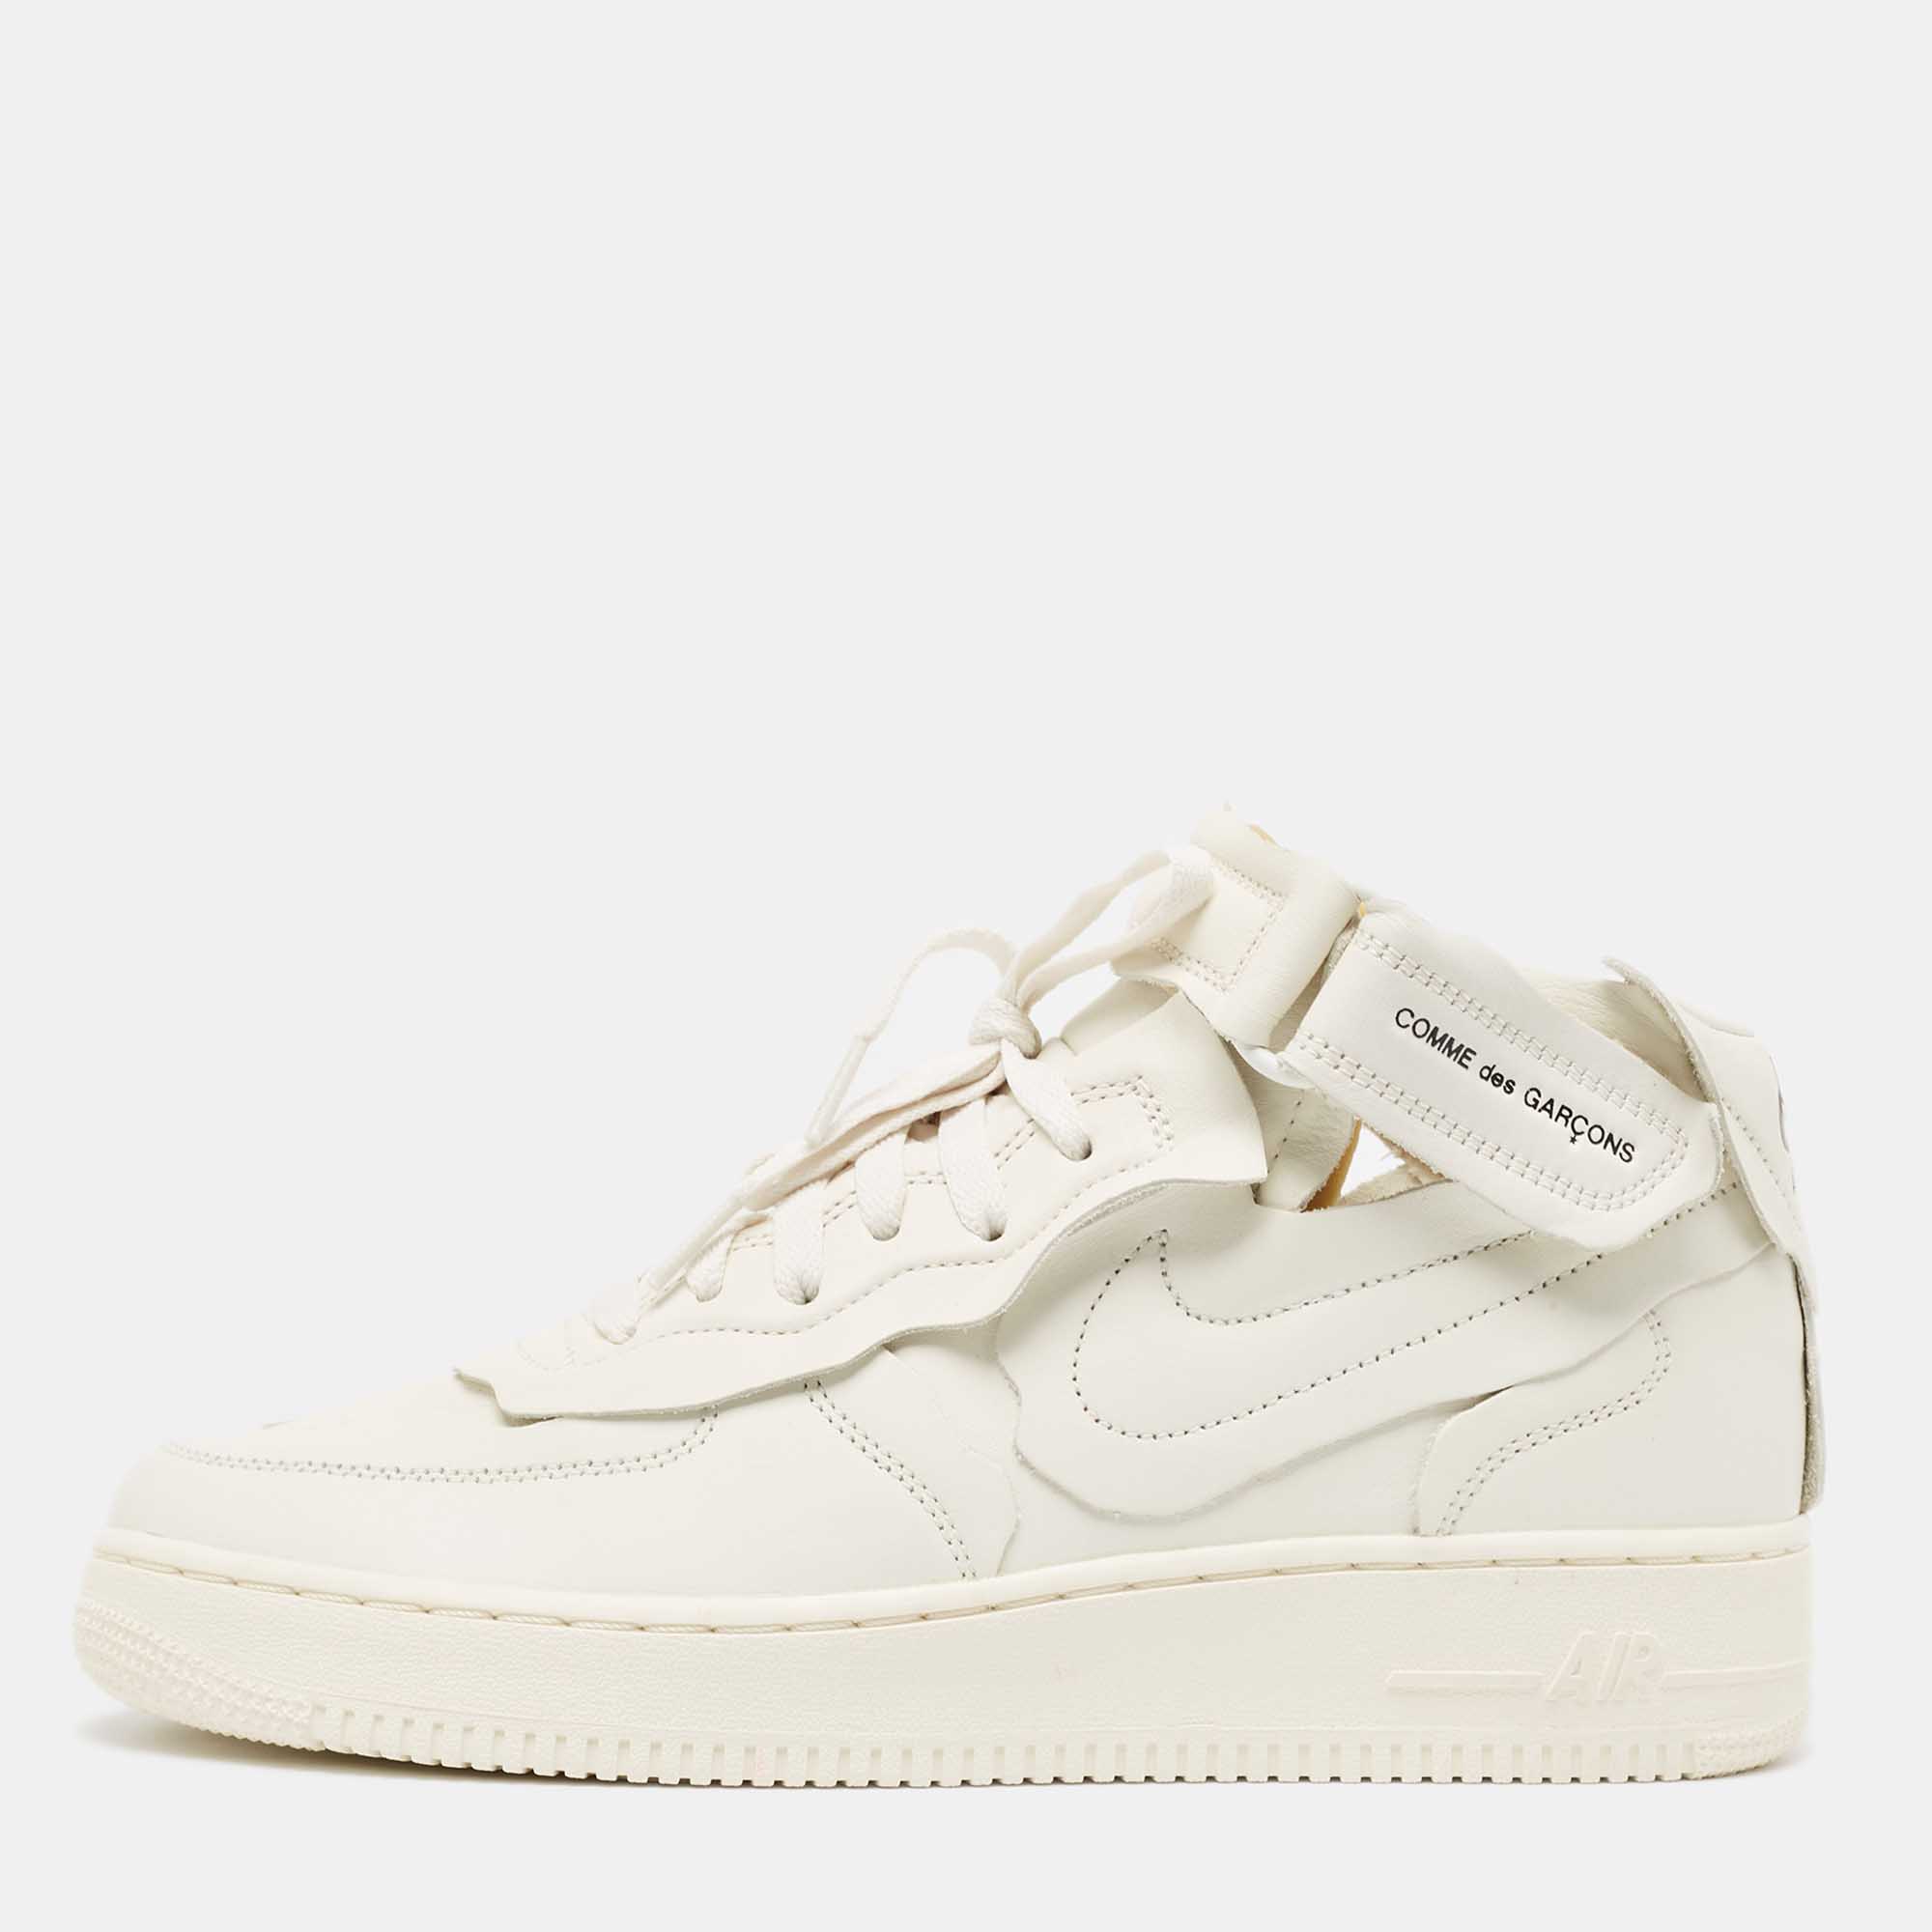 Nike air force  white leather air force1 mid comme sneakers size 42.5